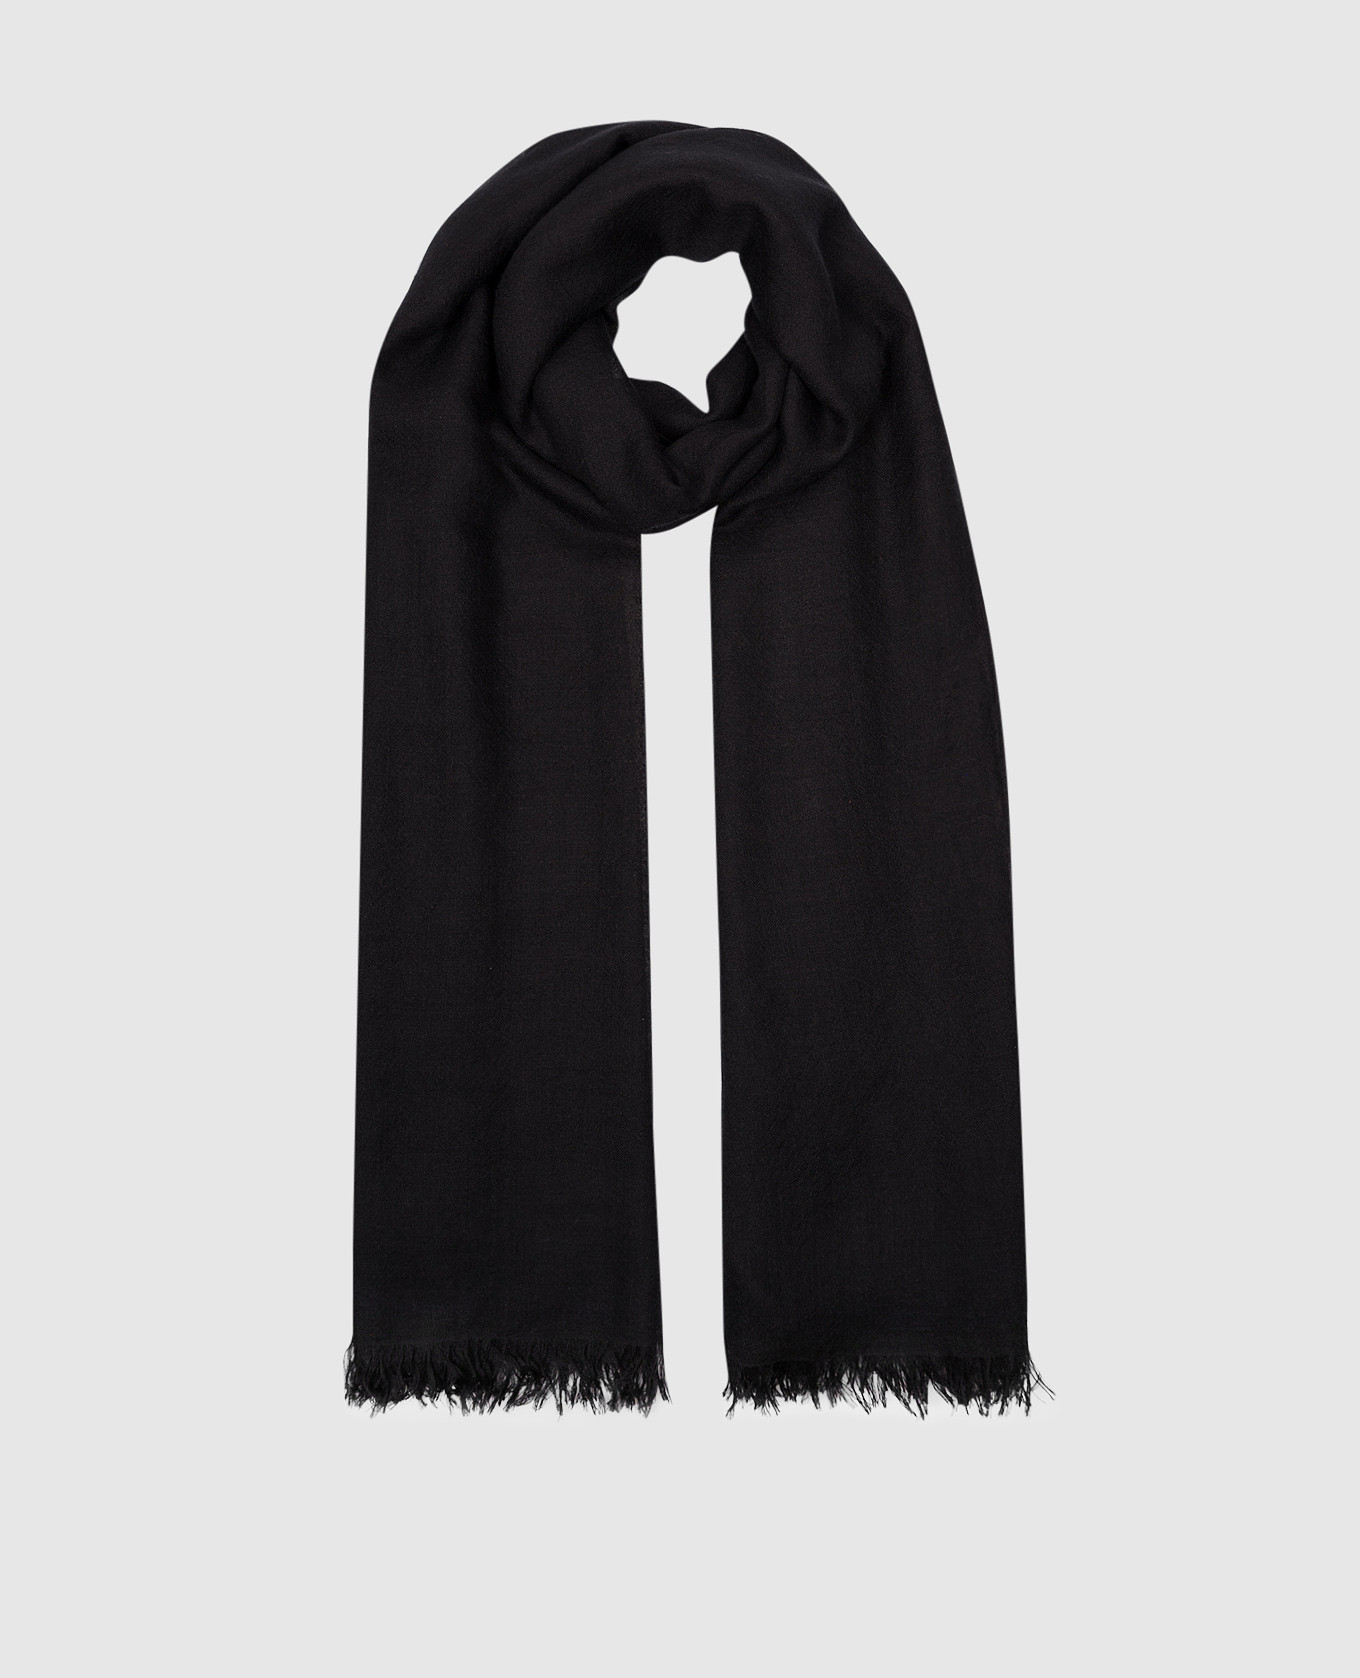 Black stole made of cashmere and silk